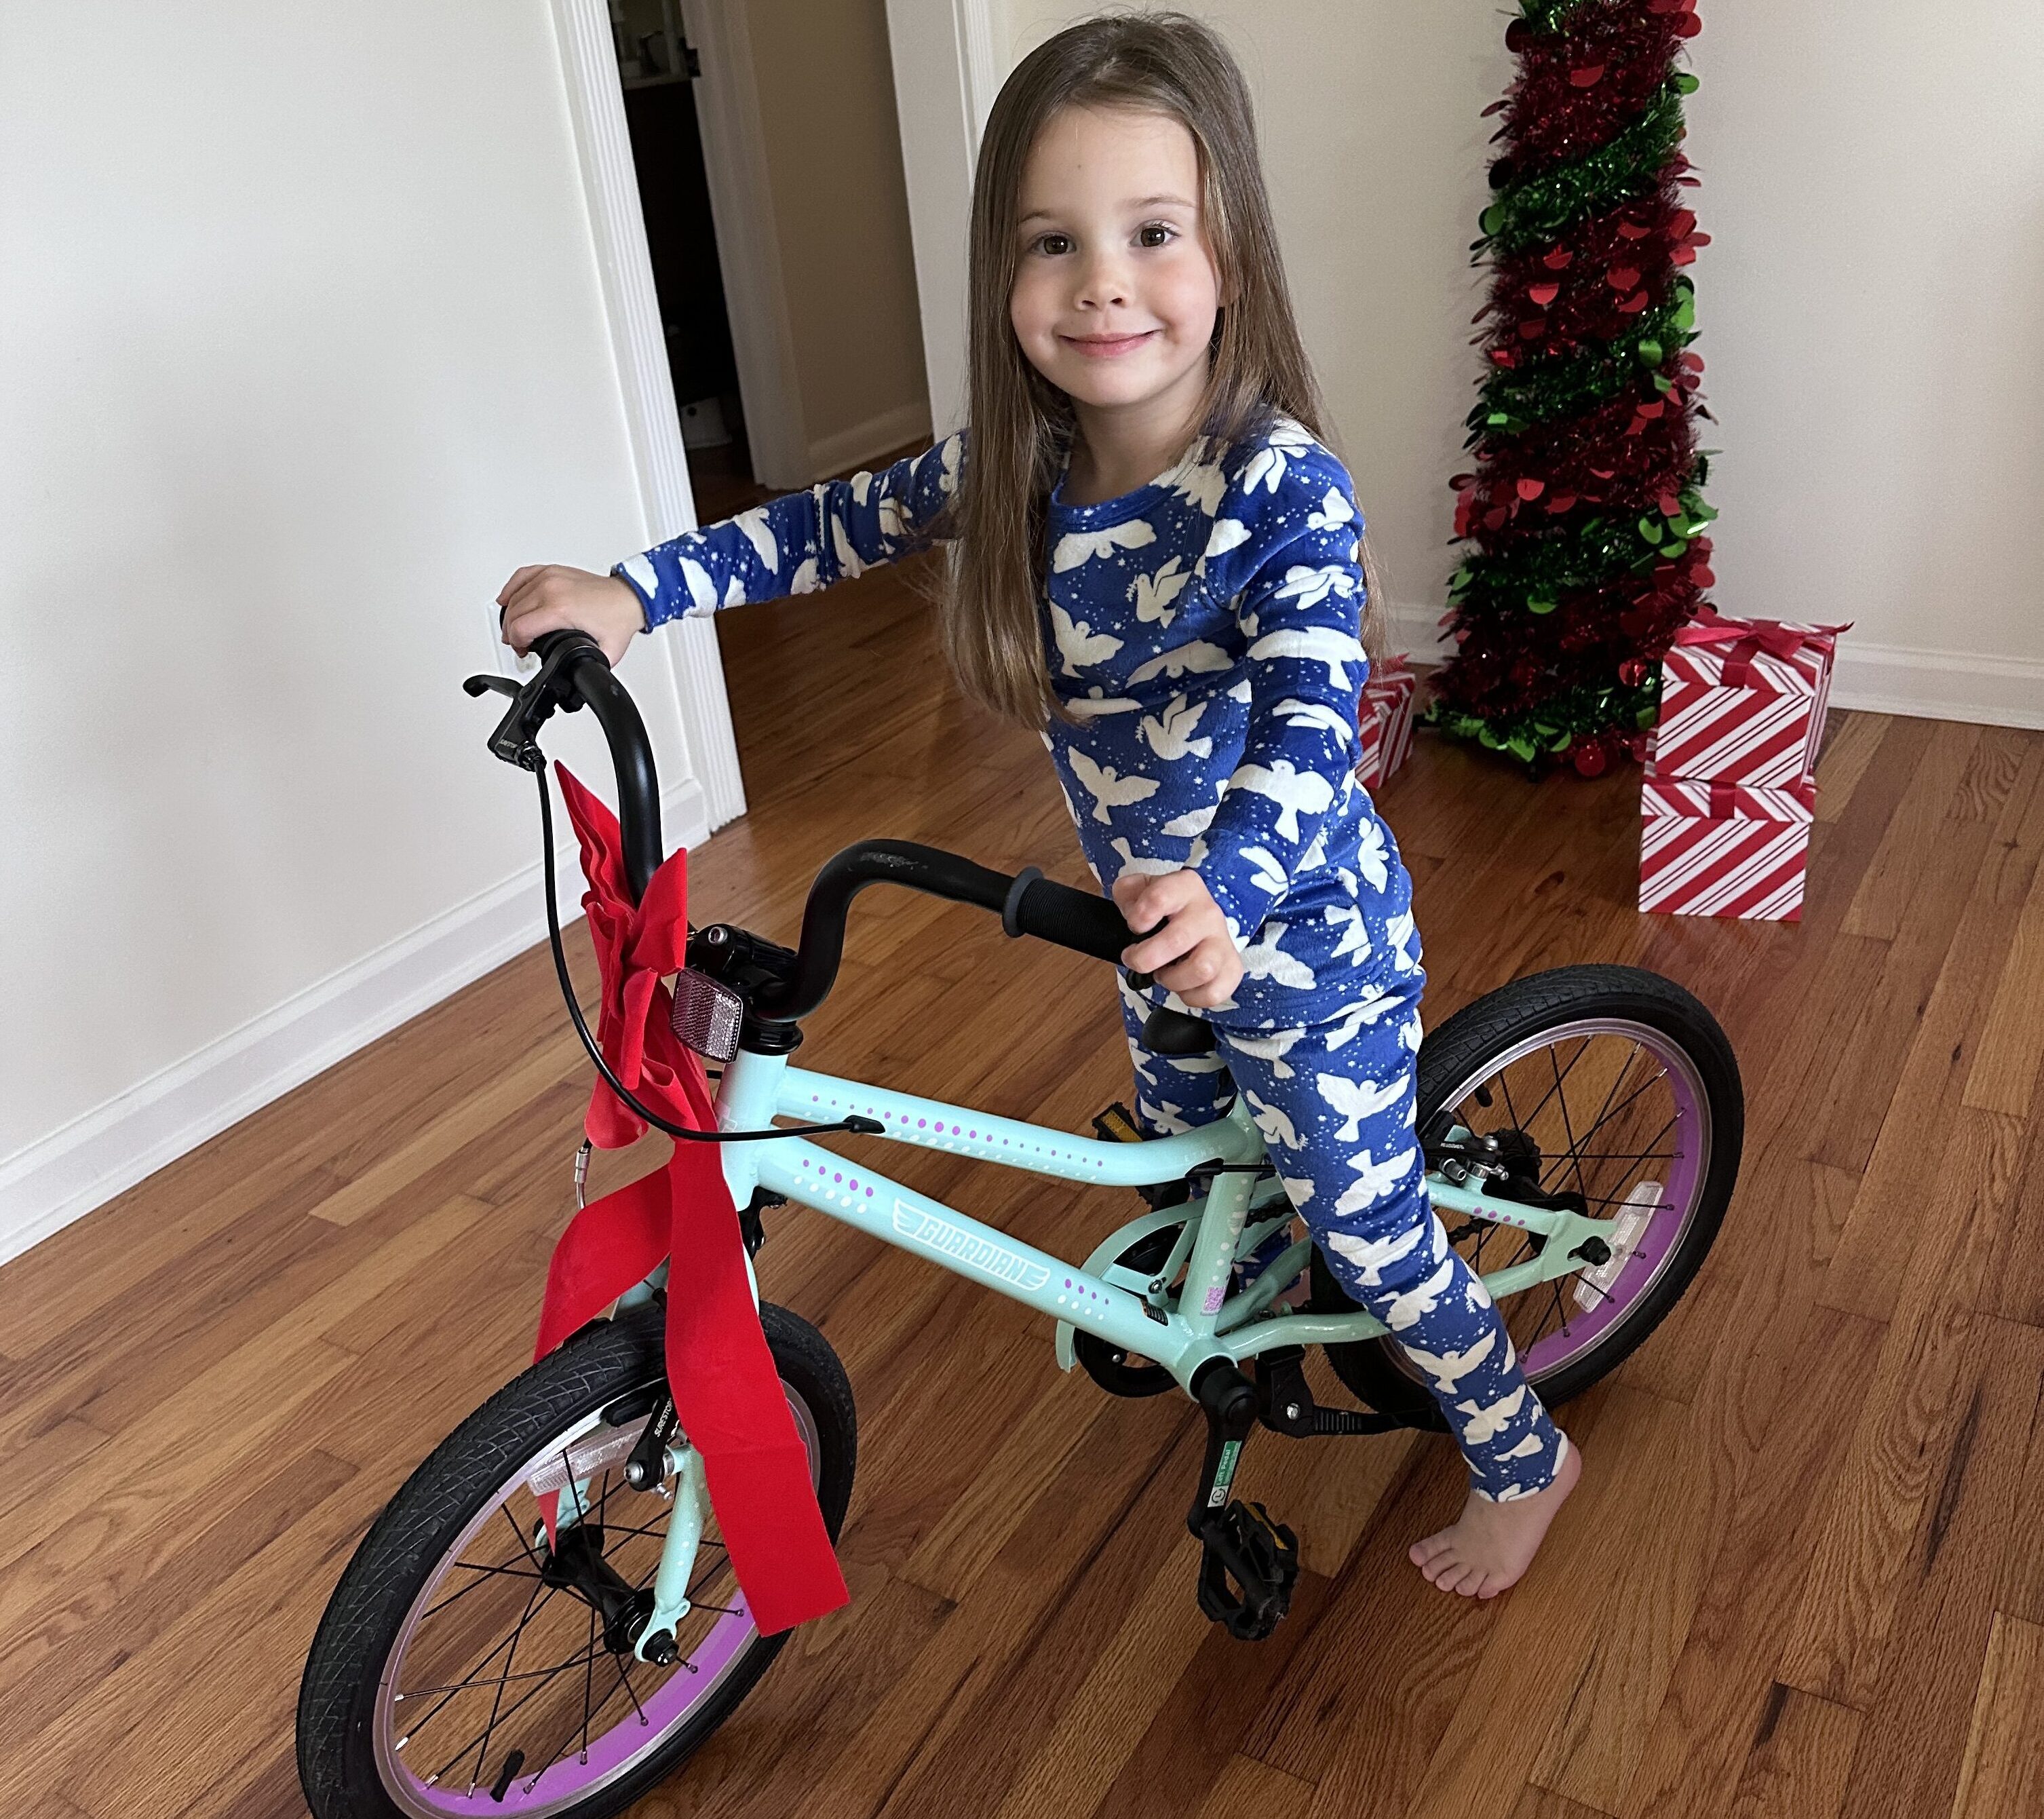 I Bought 4 Gifts for My Preschooler Last Christmas – This Is the Only One She Still Loves